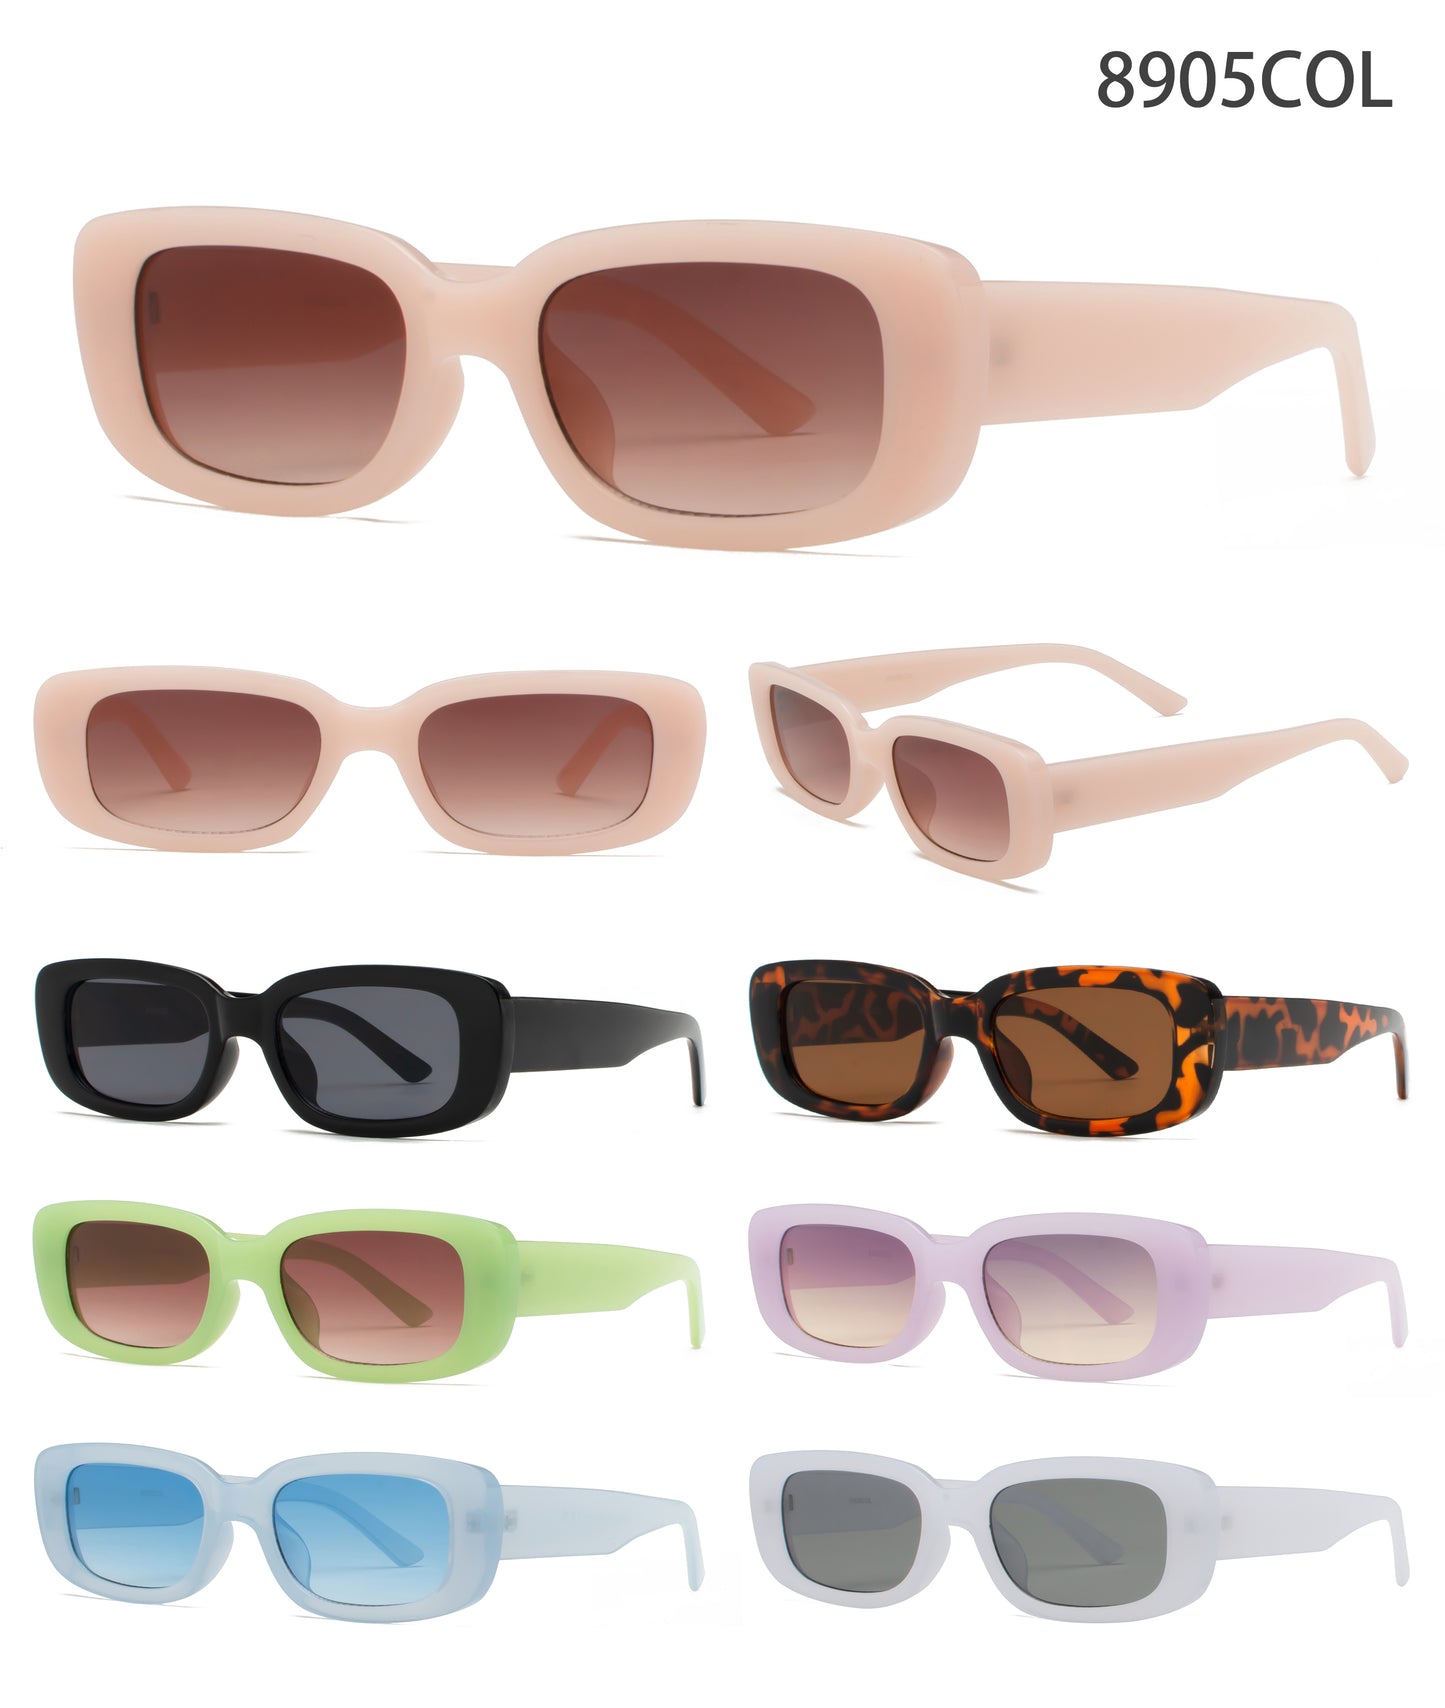 8905 Color - Rectangular Plastic Colorful Sunglasses with Flat Lens